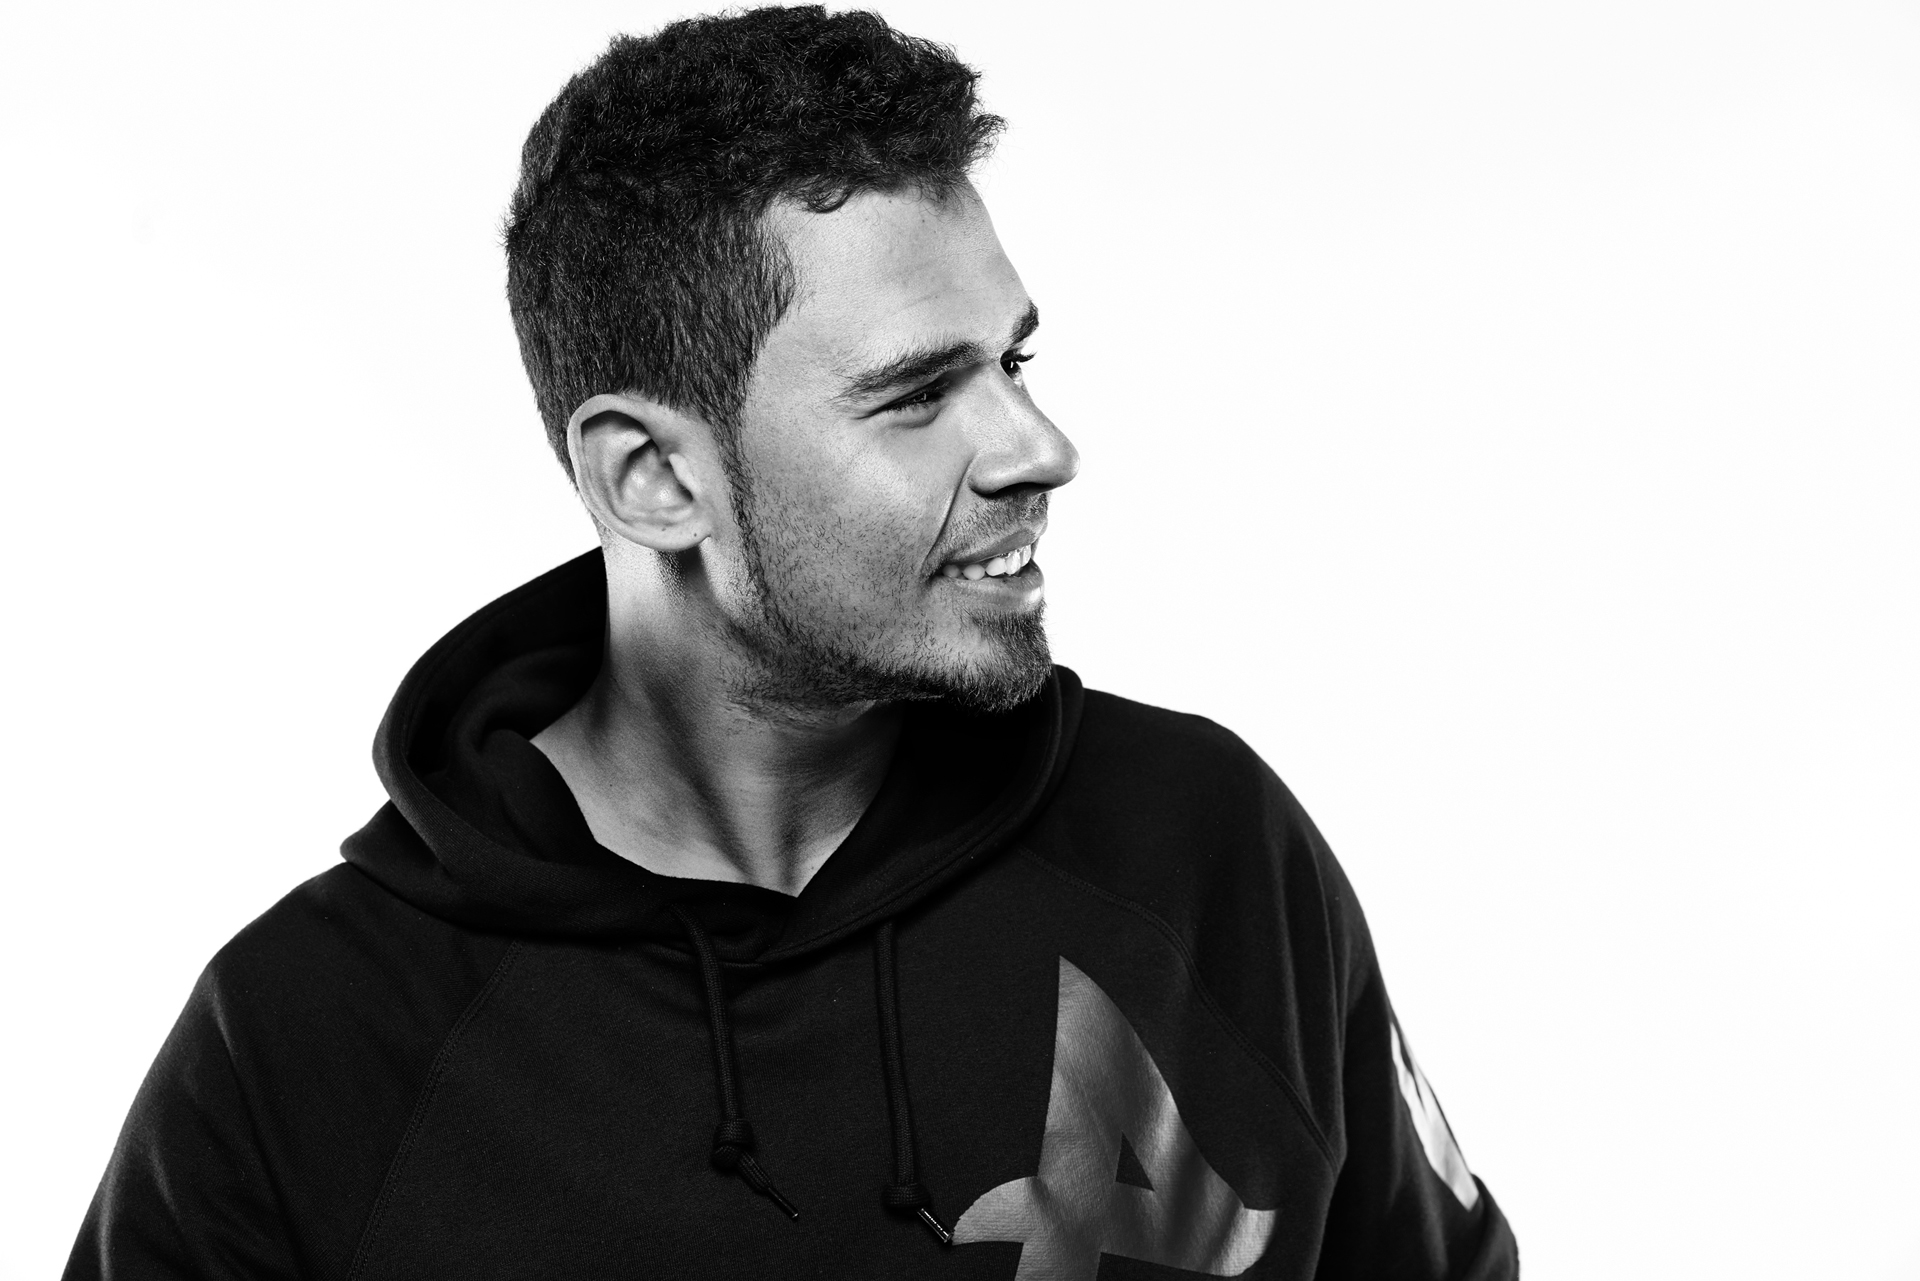 Afrojack Parts Ways With Manager Due To Ethical And Moral